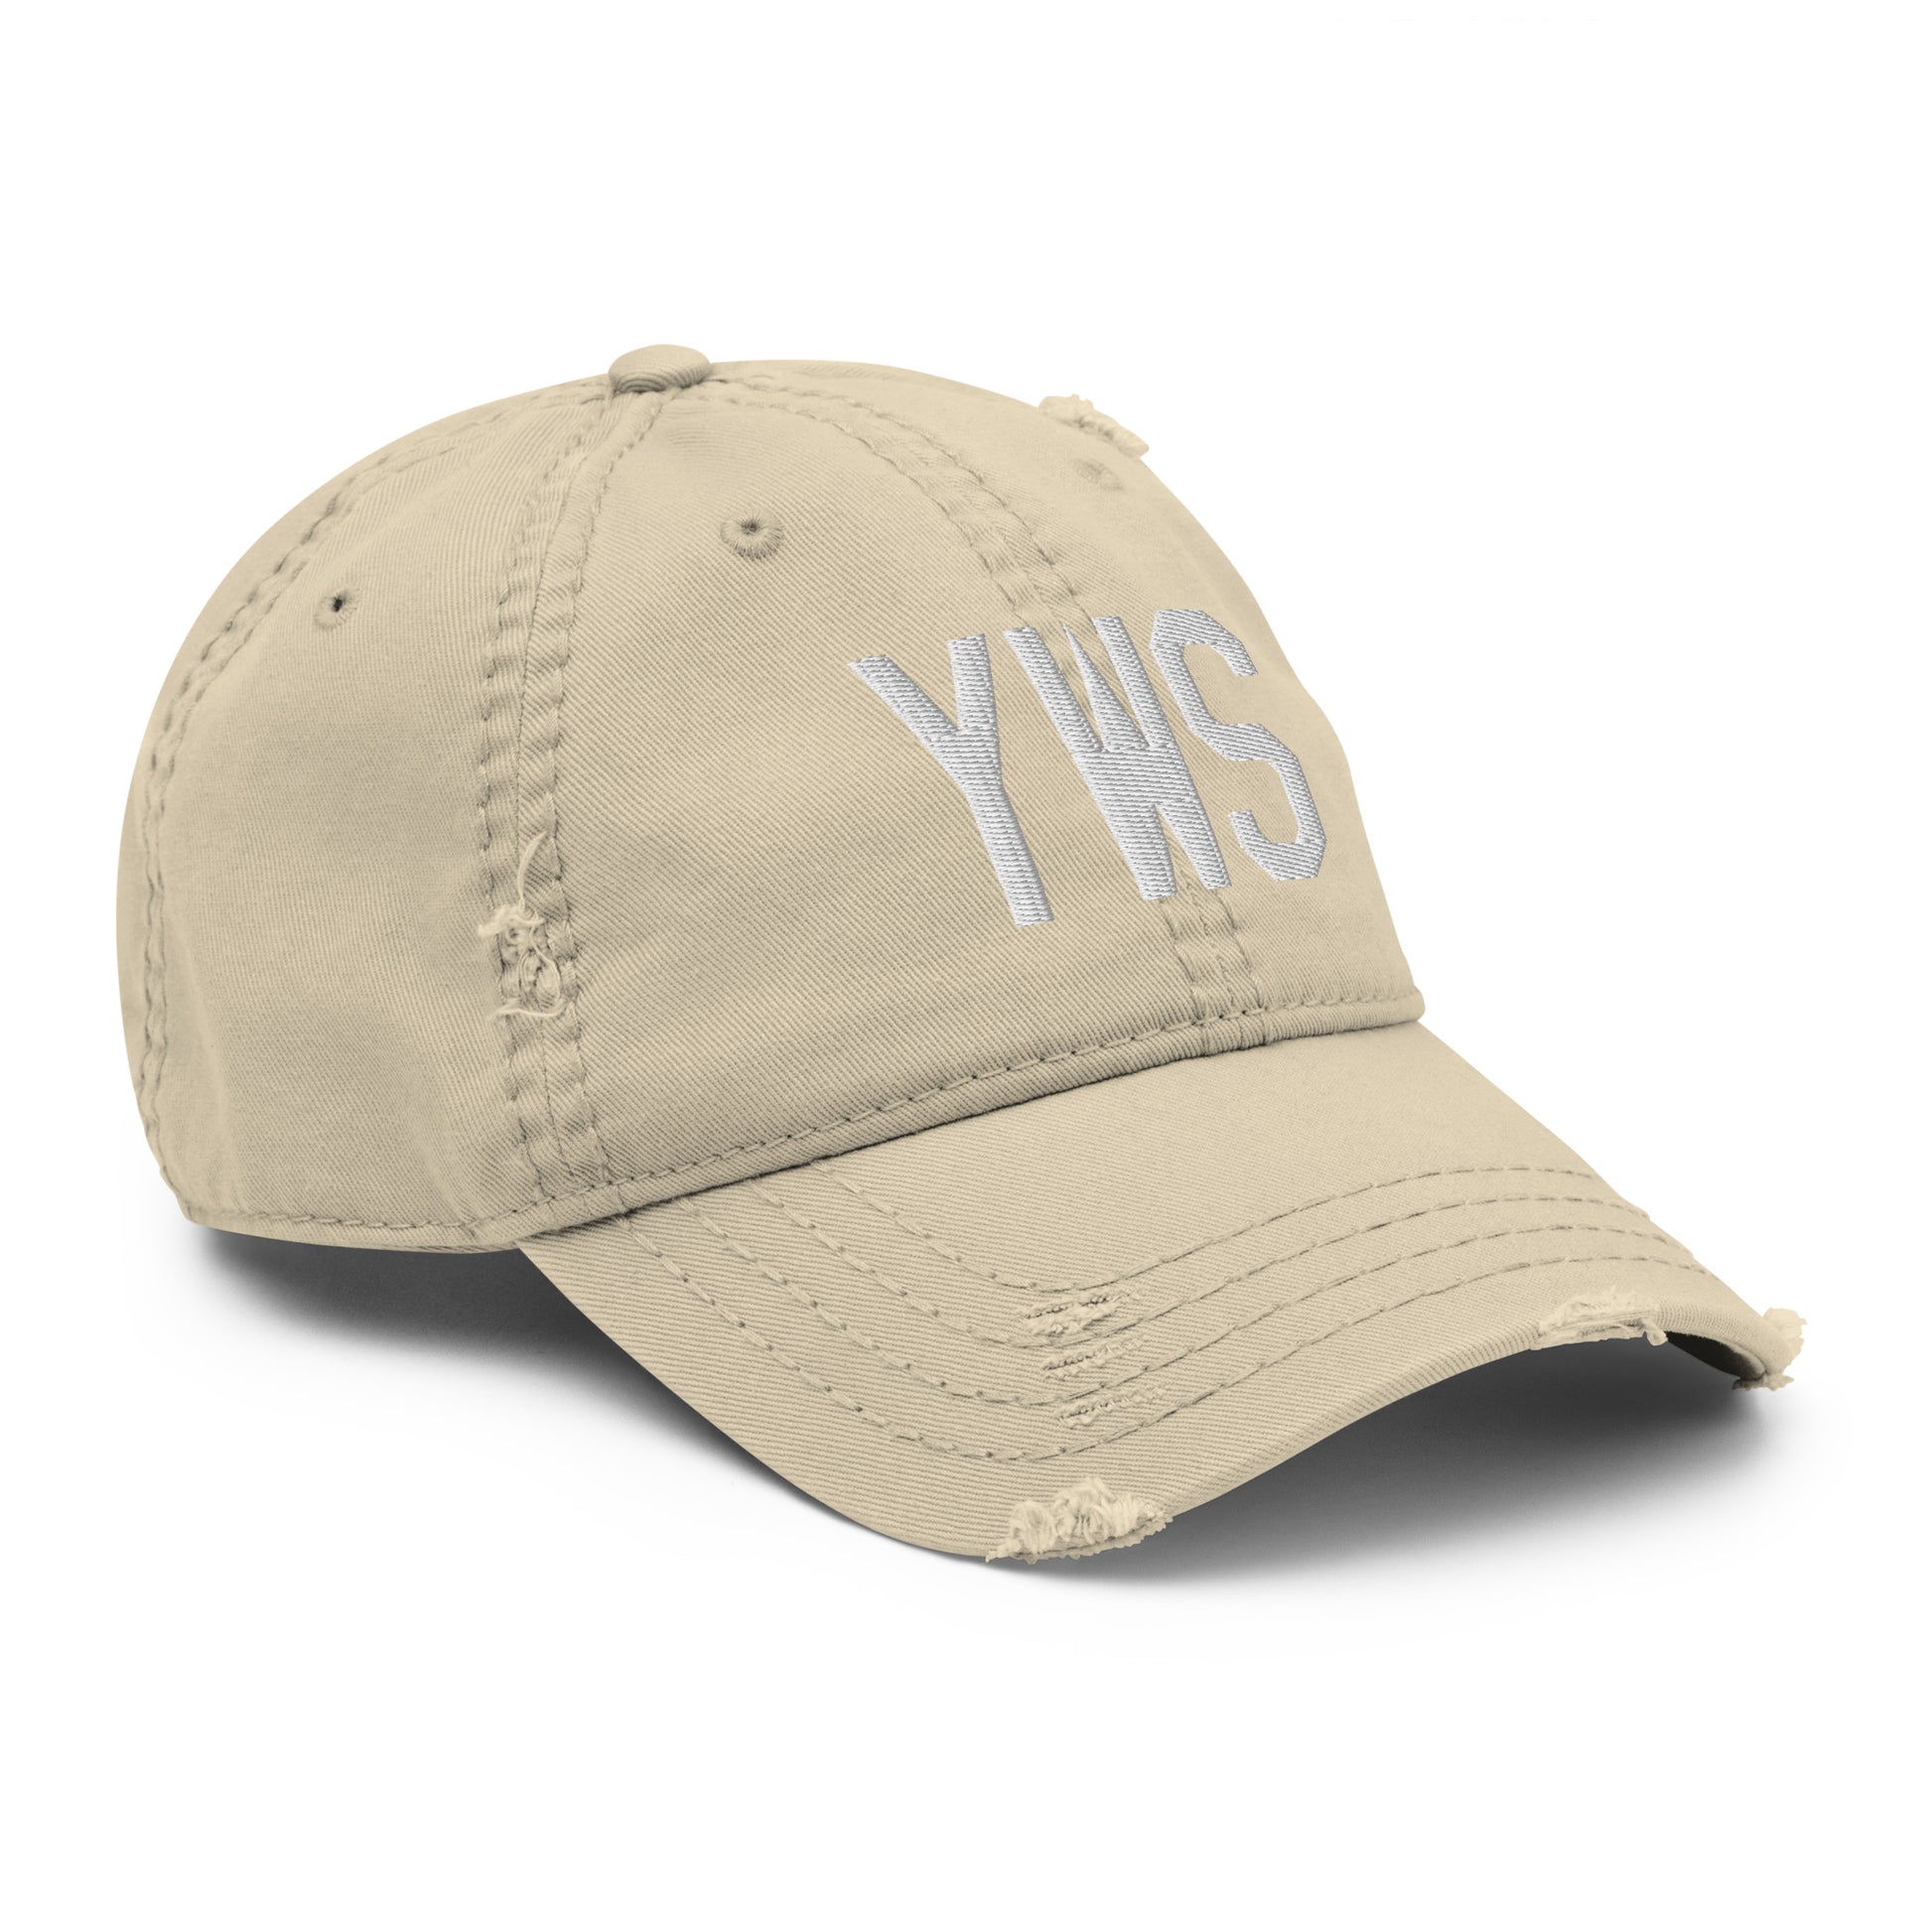 Airport Code Distressed Hat - White • YWS Whistler • YHM Designs - Image 20